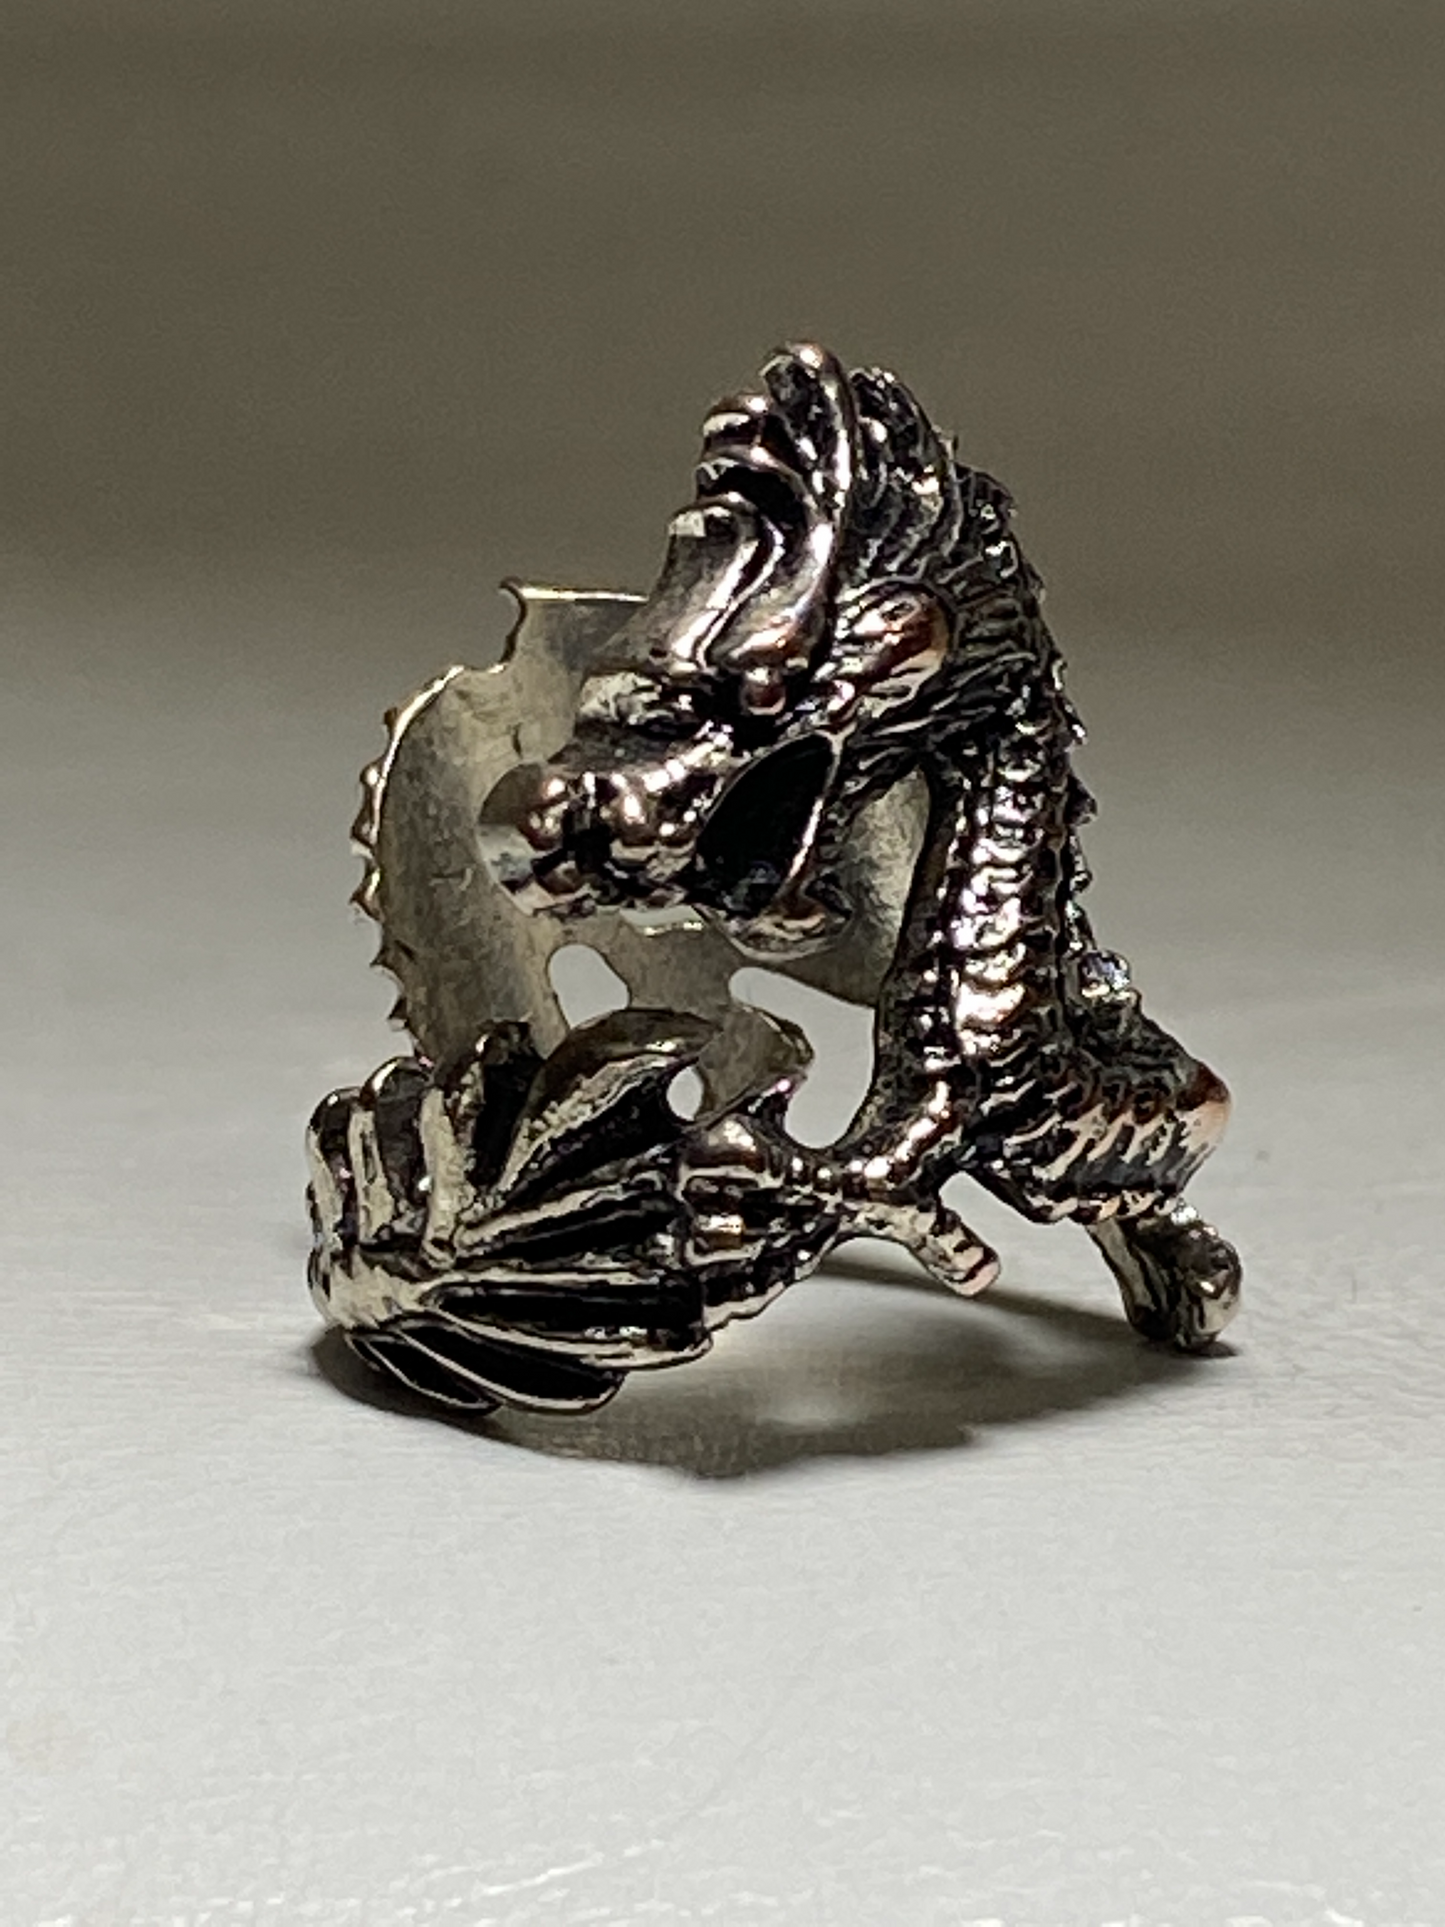 Dragon ring fire breathing band women sterling silver